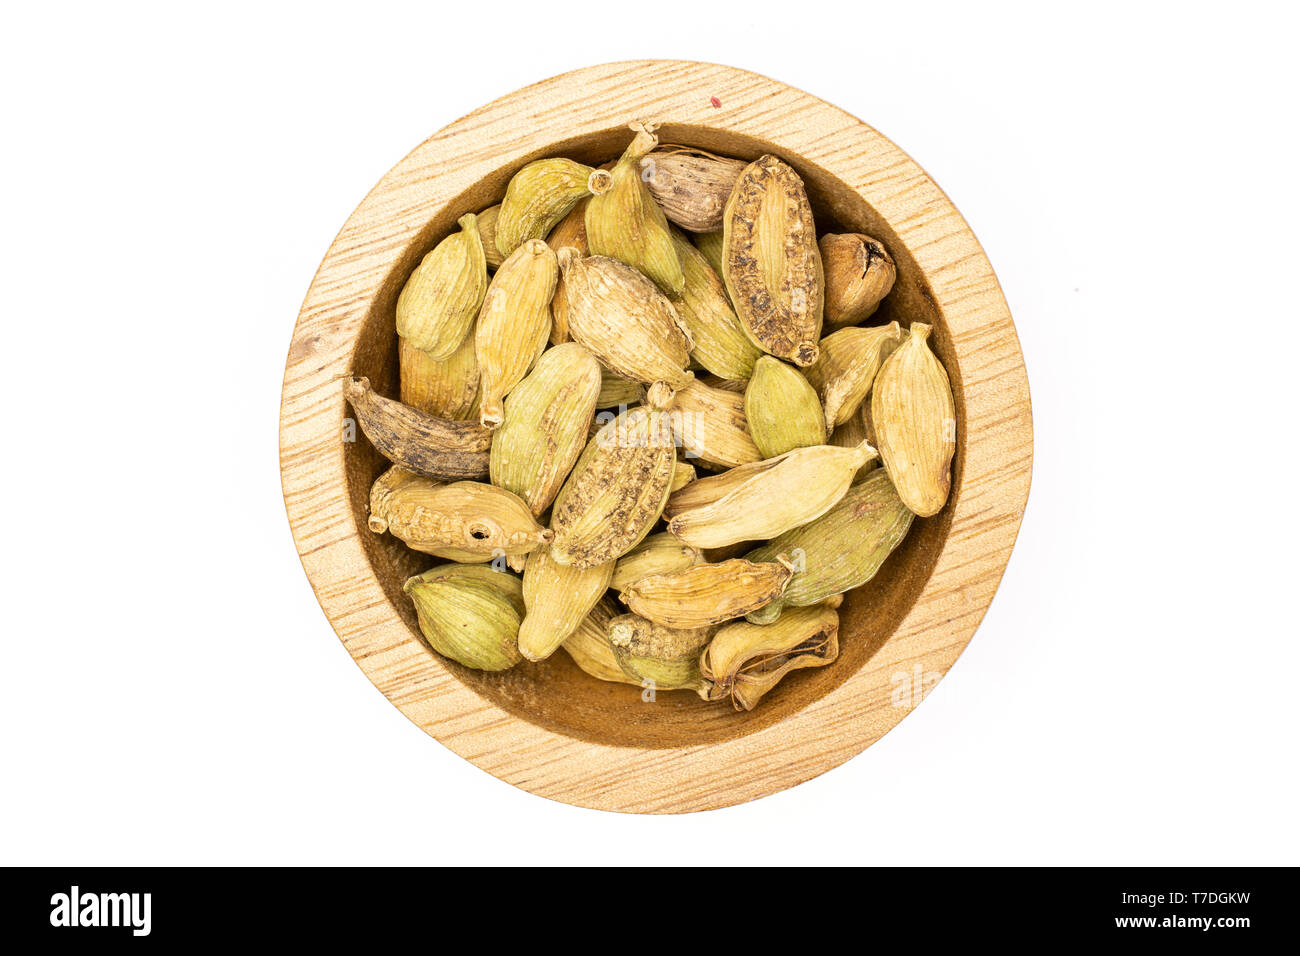 Lot of whole true cardamom pod in a wooden bowl flatlay isolated on white background Stock Photo